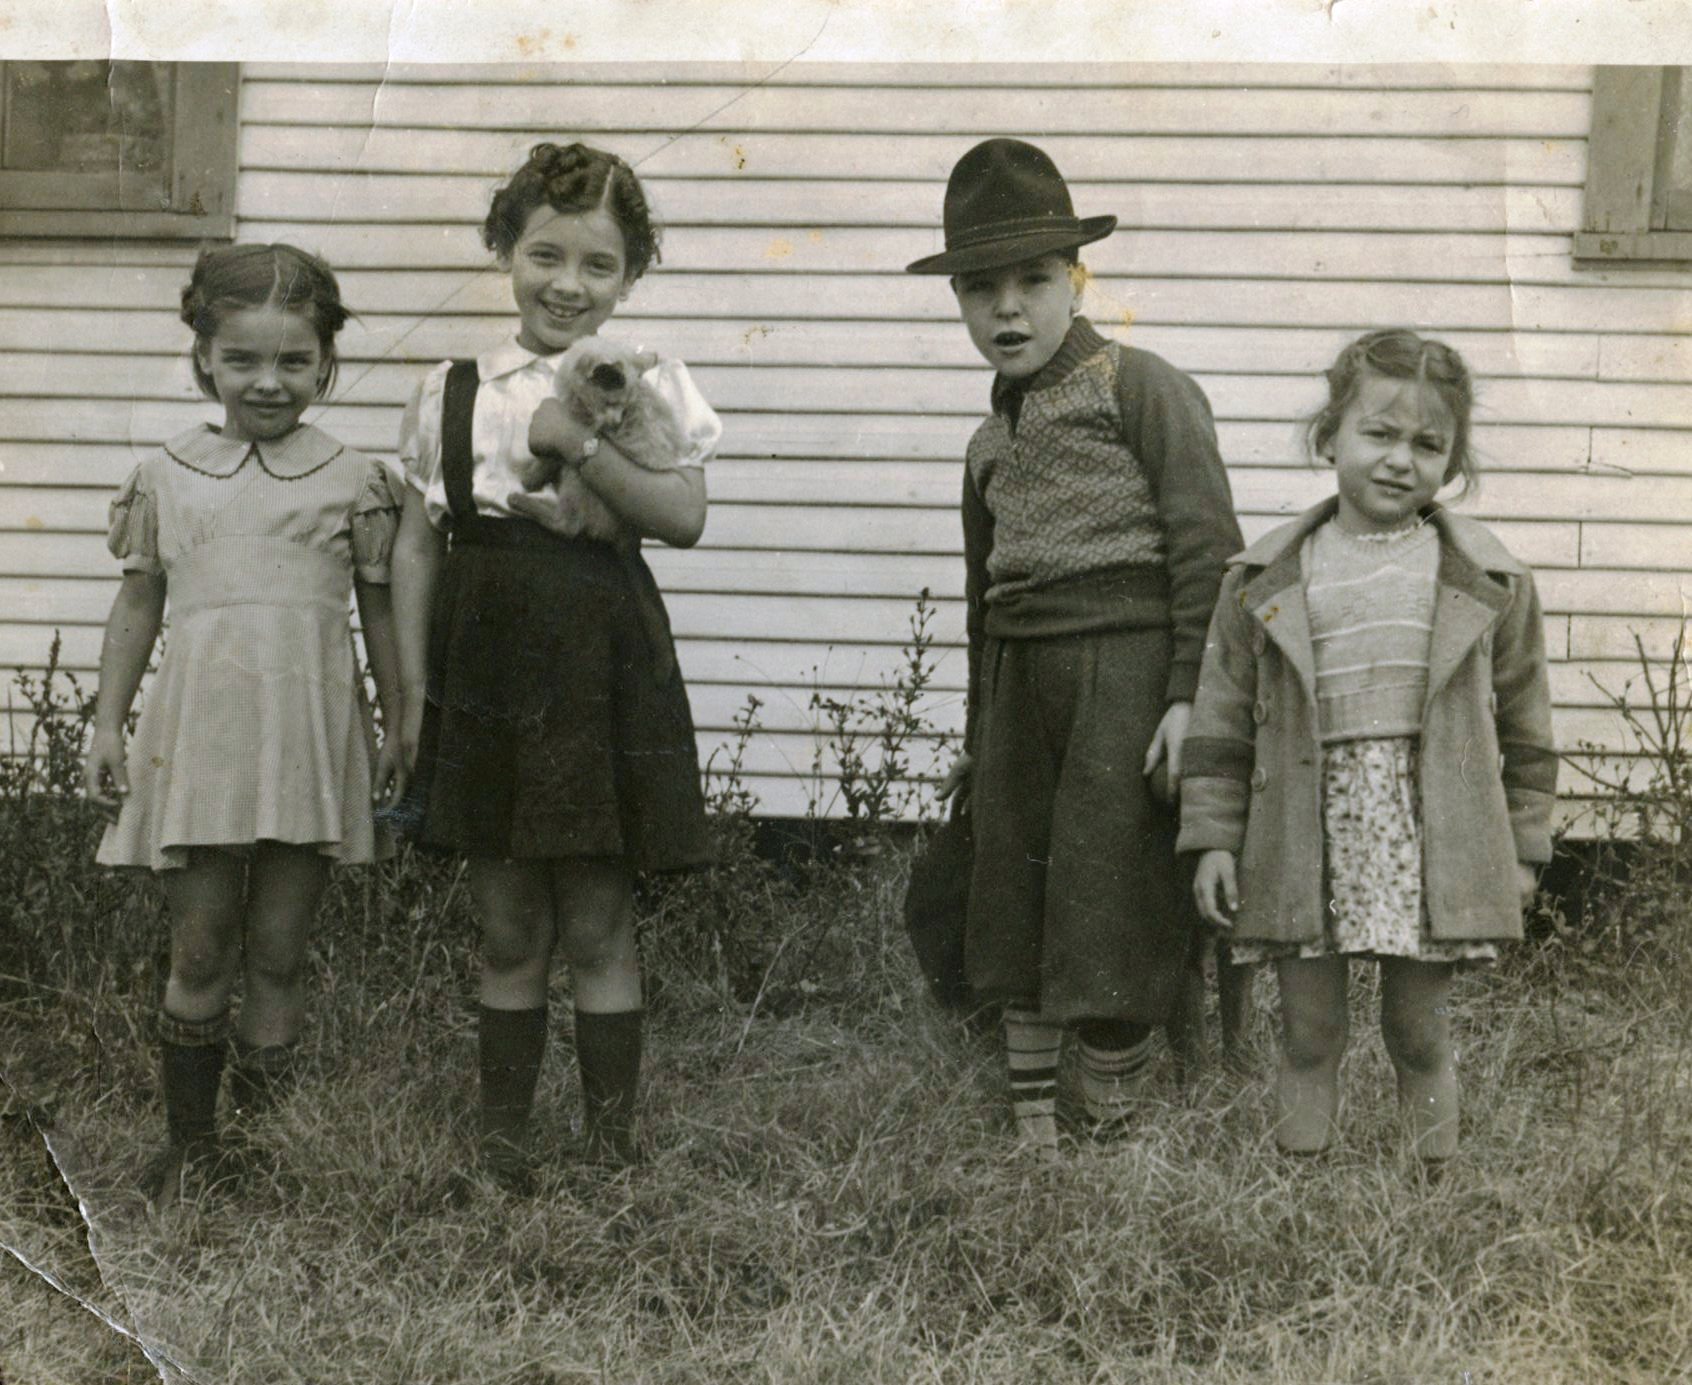 Anna Halterman Perry: Anna and some of her siblings back in West Virginia